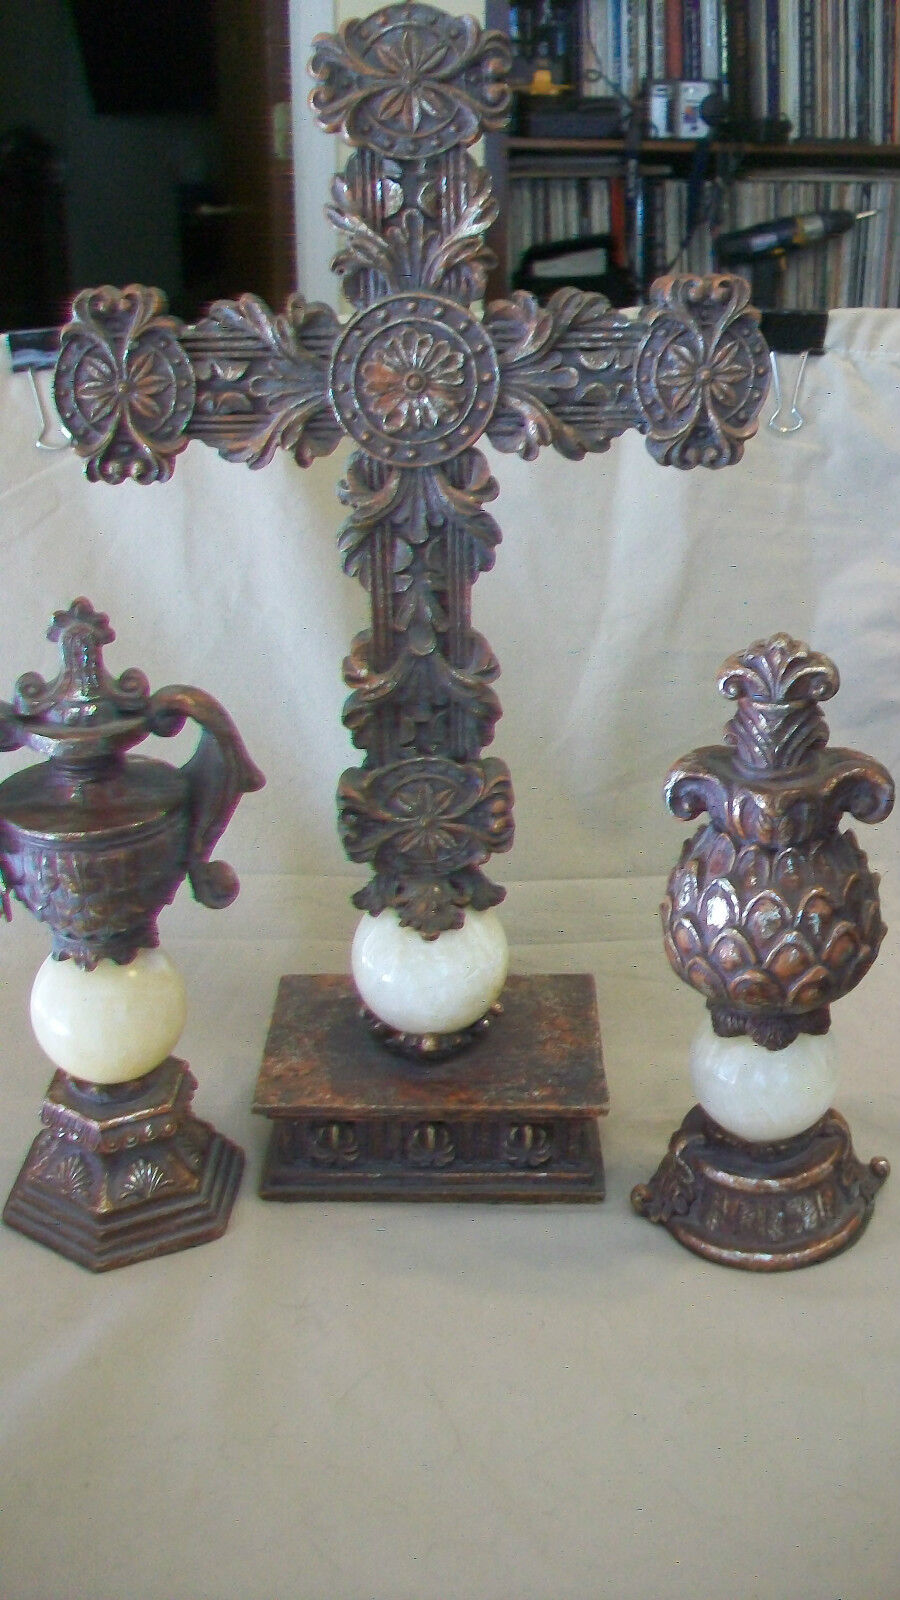 DECORATIVE RESIN CROSS WITH TWO SIDE PIECES, ANTIQUED FINISH RESIN, UNIQUE